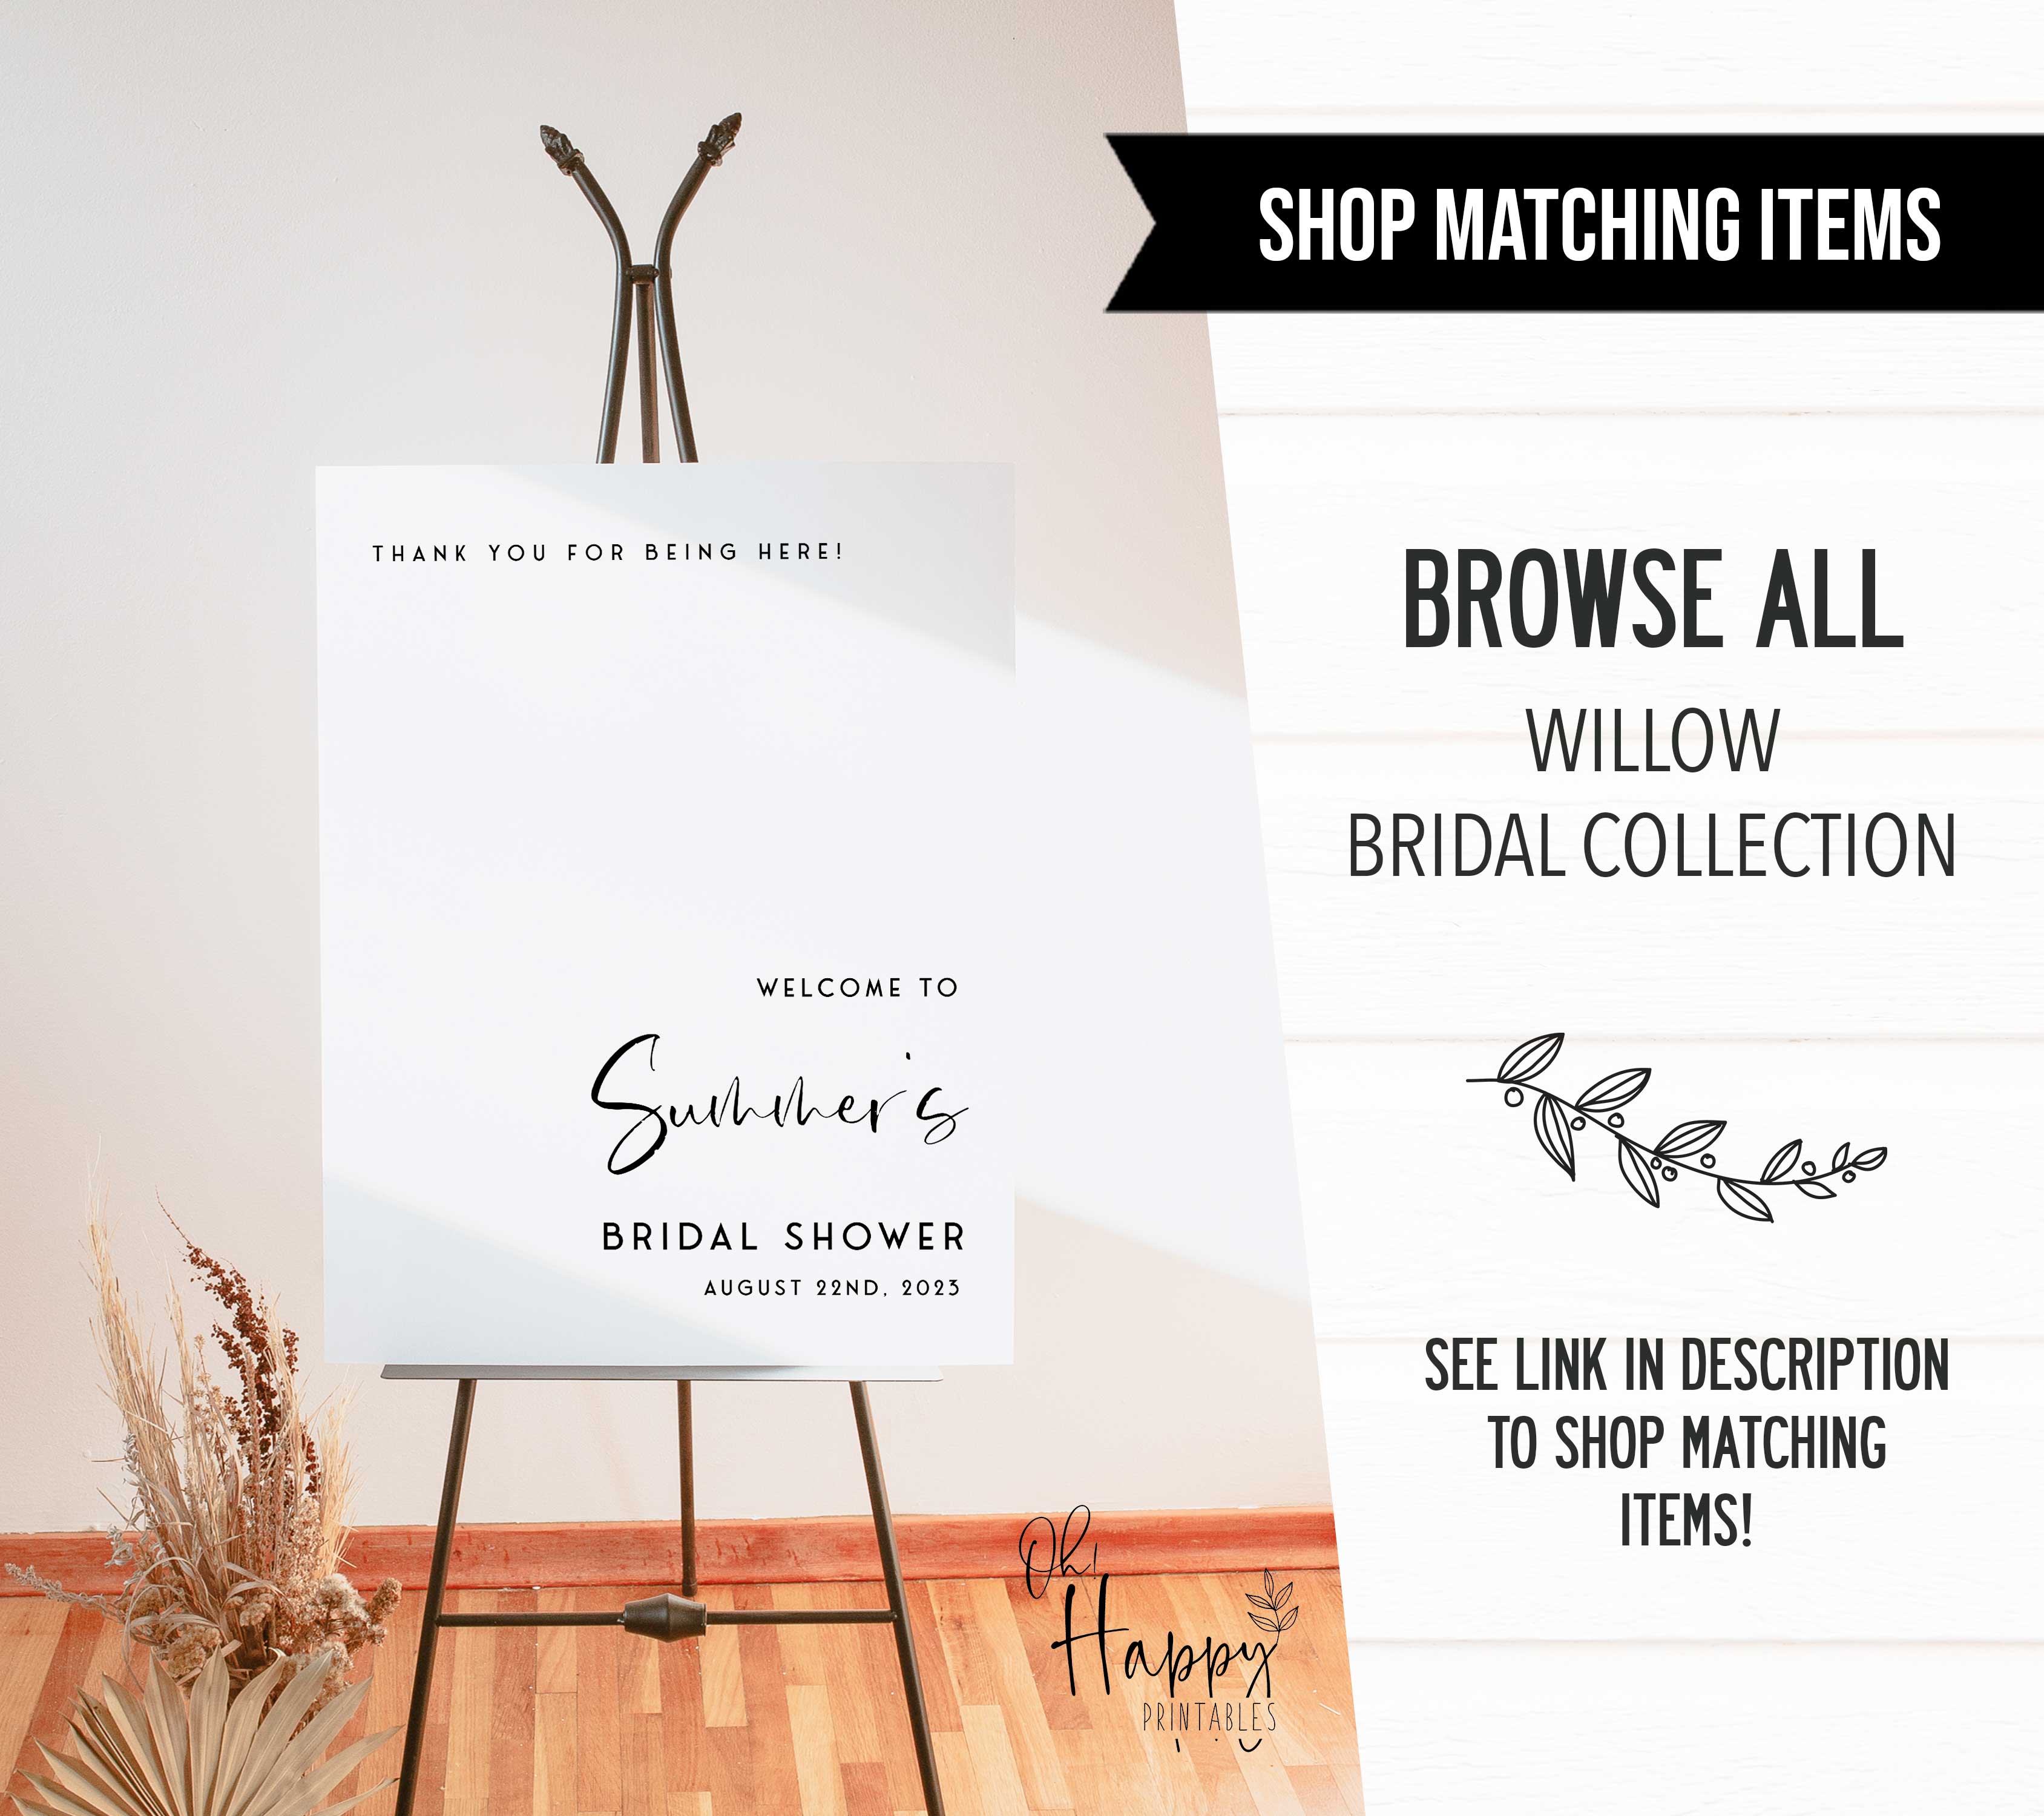 Fully editable and printable bridal shower mad libs game with a modern minimalist design. Perfect for a modern simple bridal shower themed party